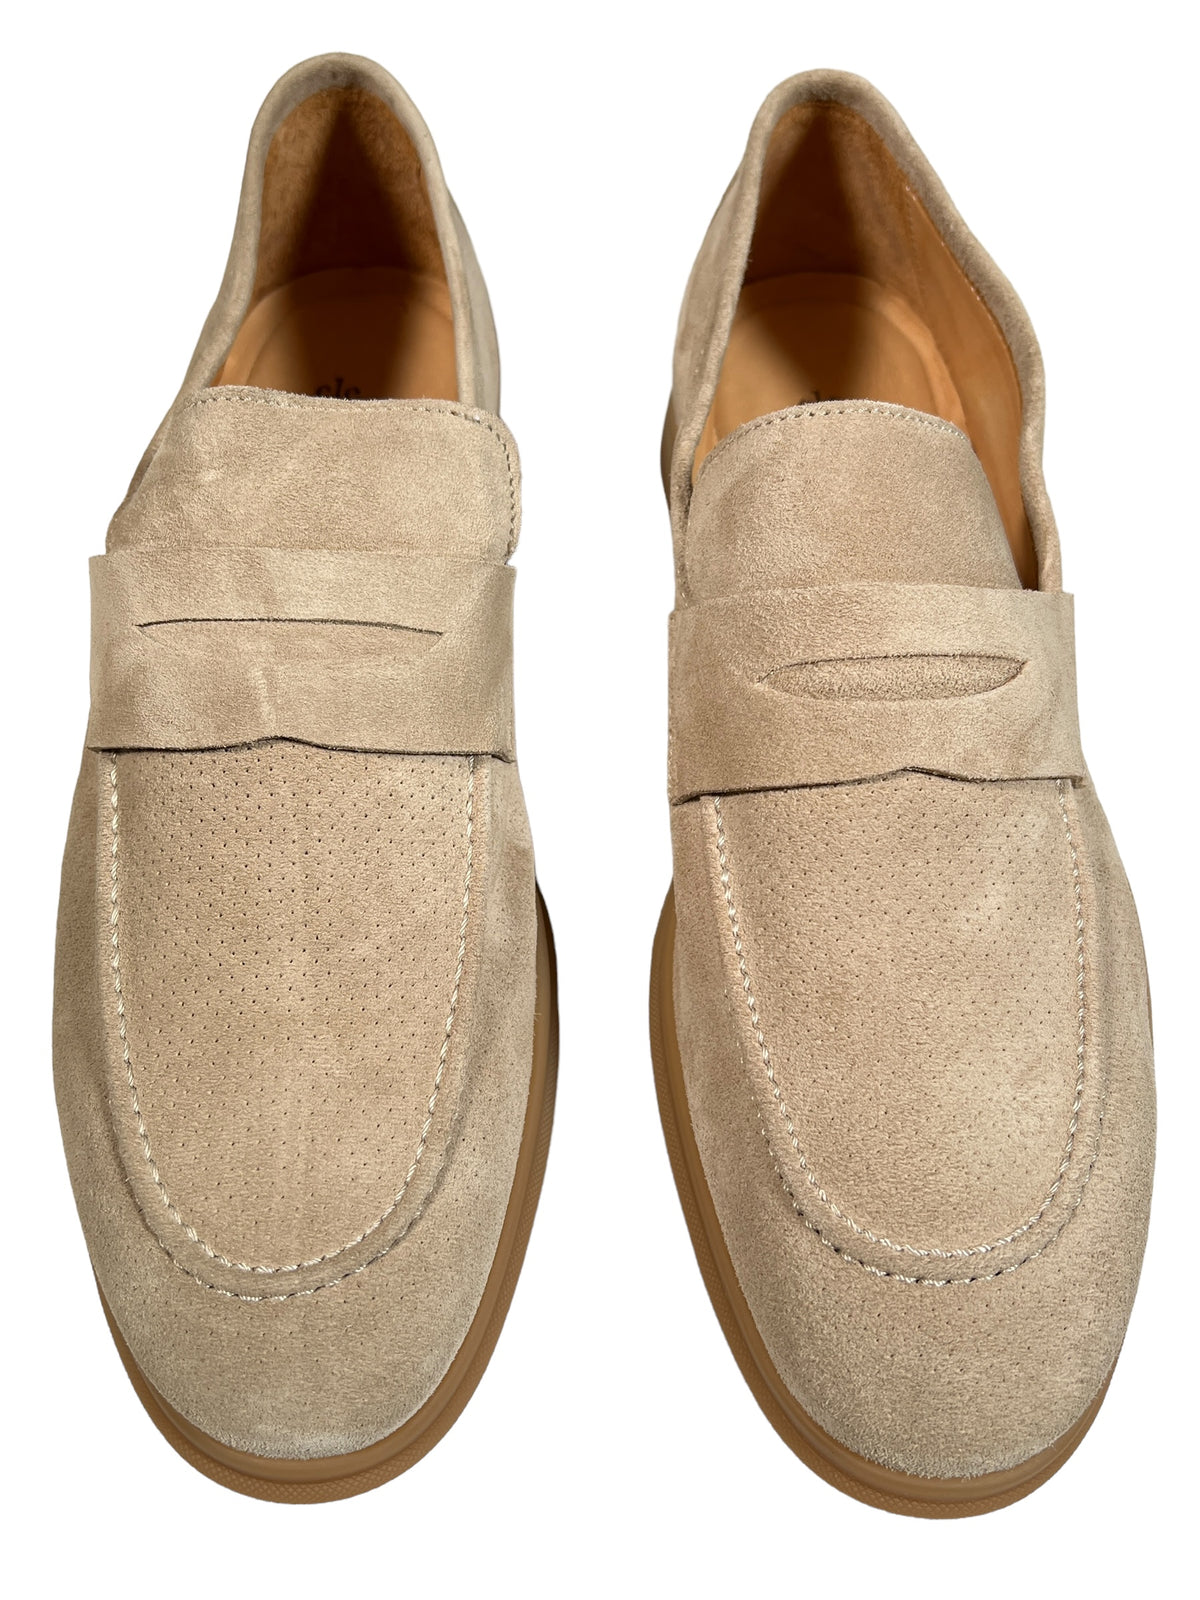 ELEVENTY PERFORATED SUEDE LOAFER - TAUPE